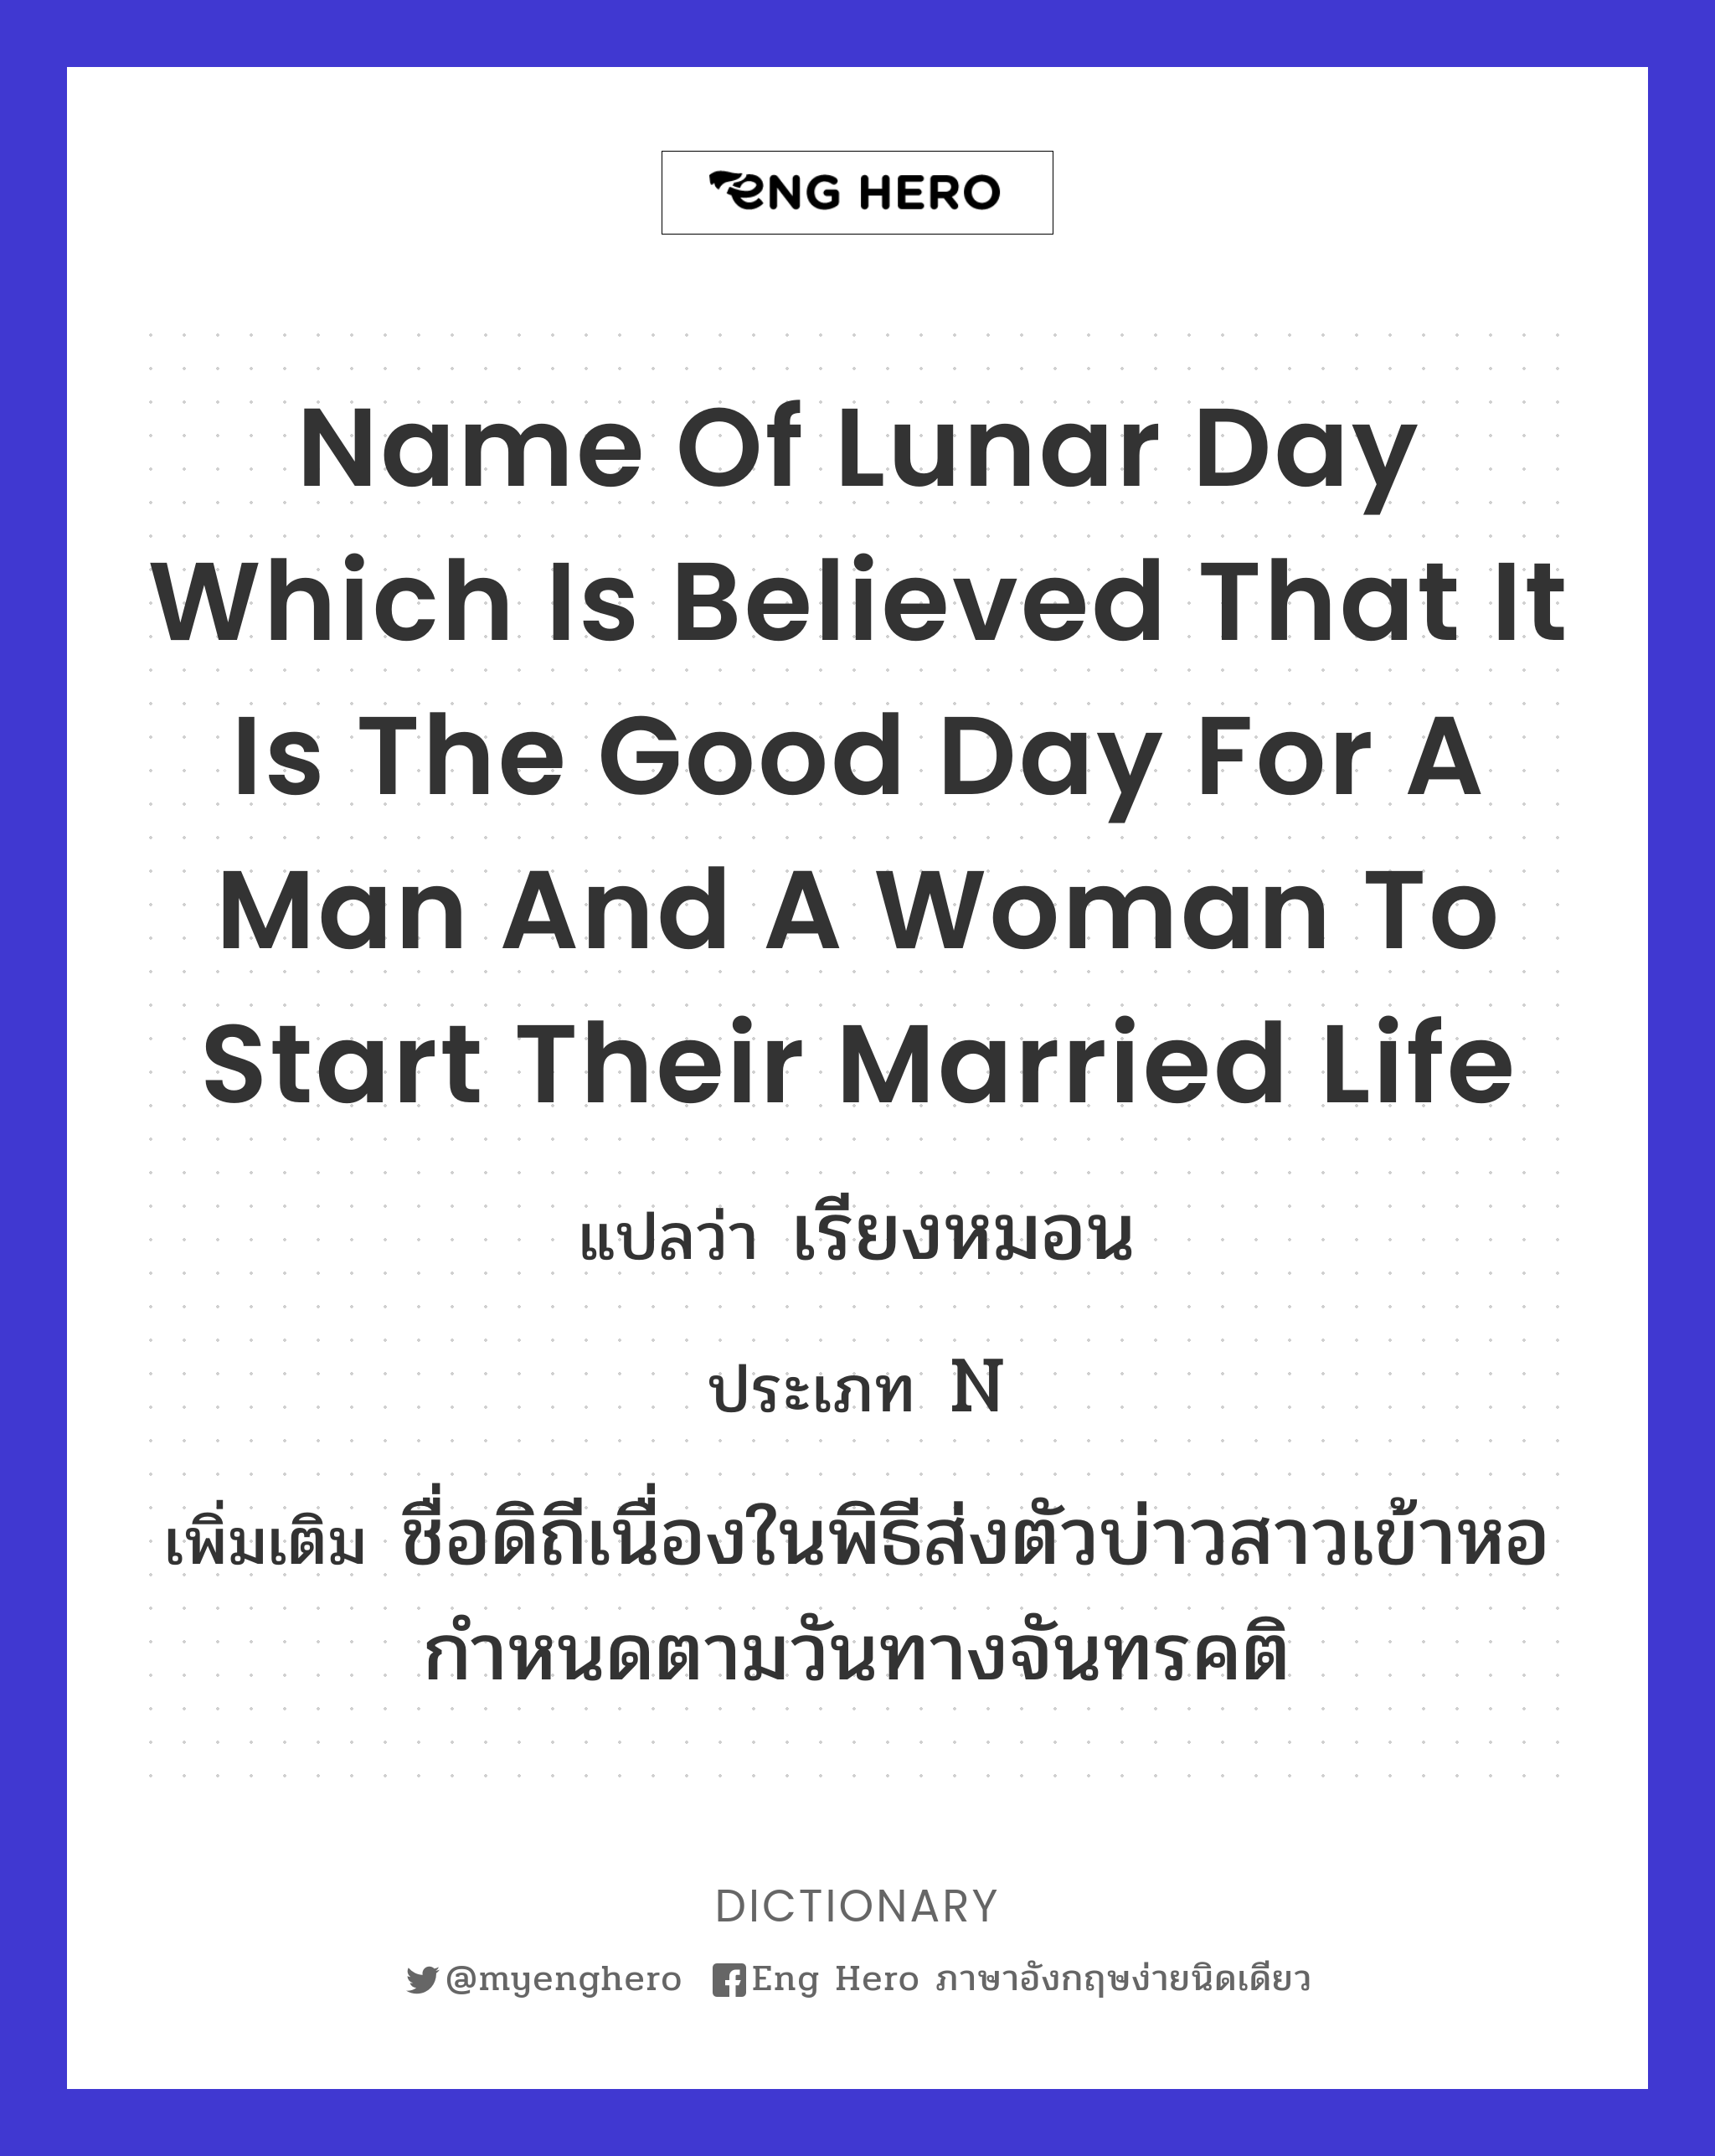 name of lunar day which is believed that it is the good day for a man and a woman to start their married life